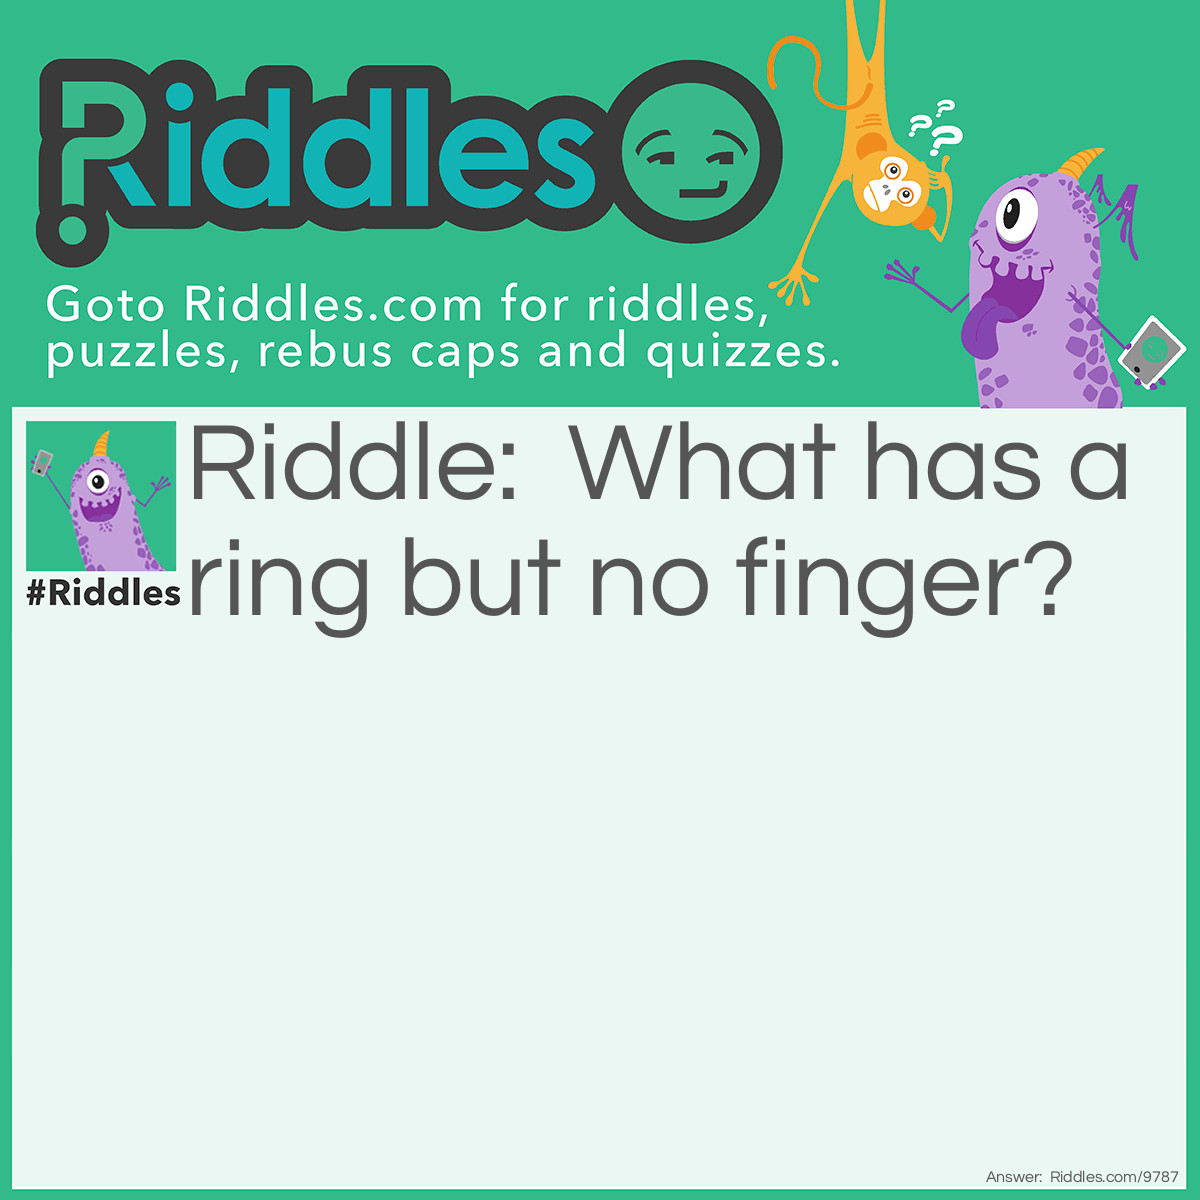 Riddle: What has a ring but no finger? Answer: A telephone or alarm.